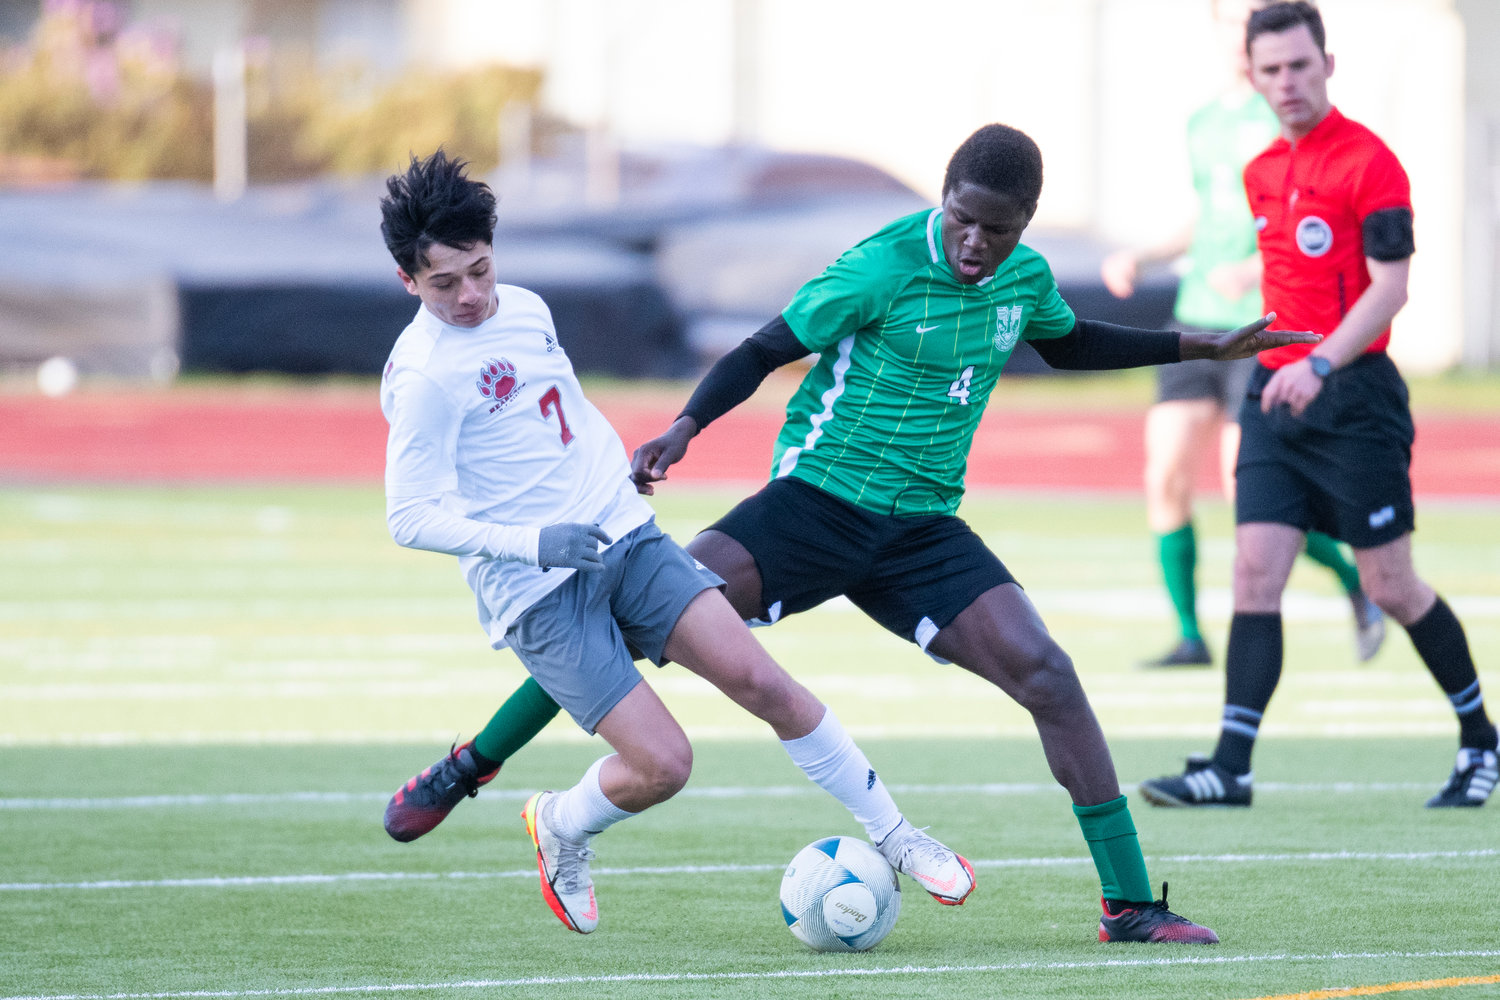 W.F. West's Damian Hernandez (7) and Tumwater's Sambou Jamada (4) battle for possession during the district semfinals on May 12.